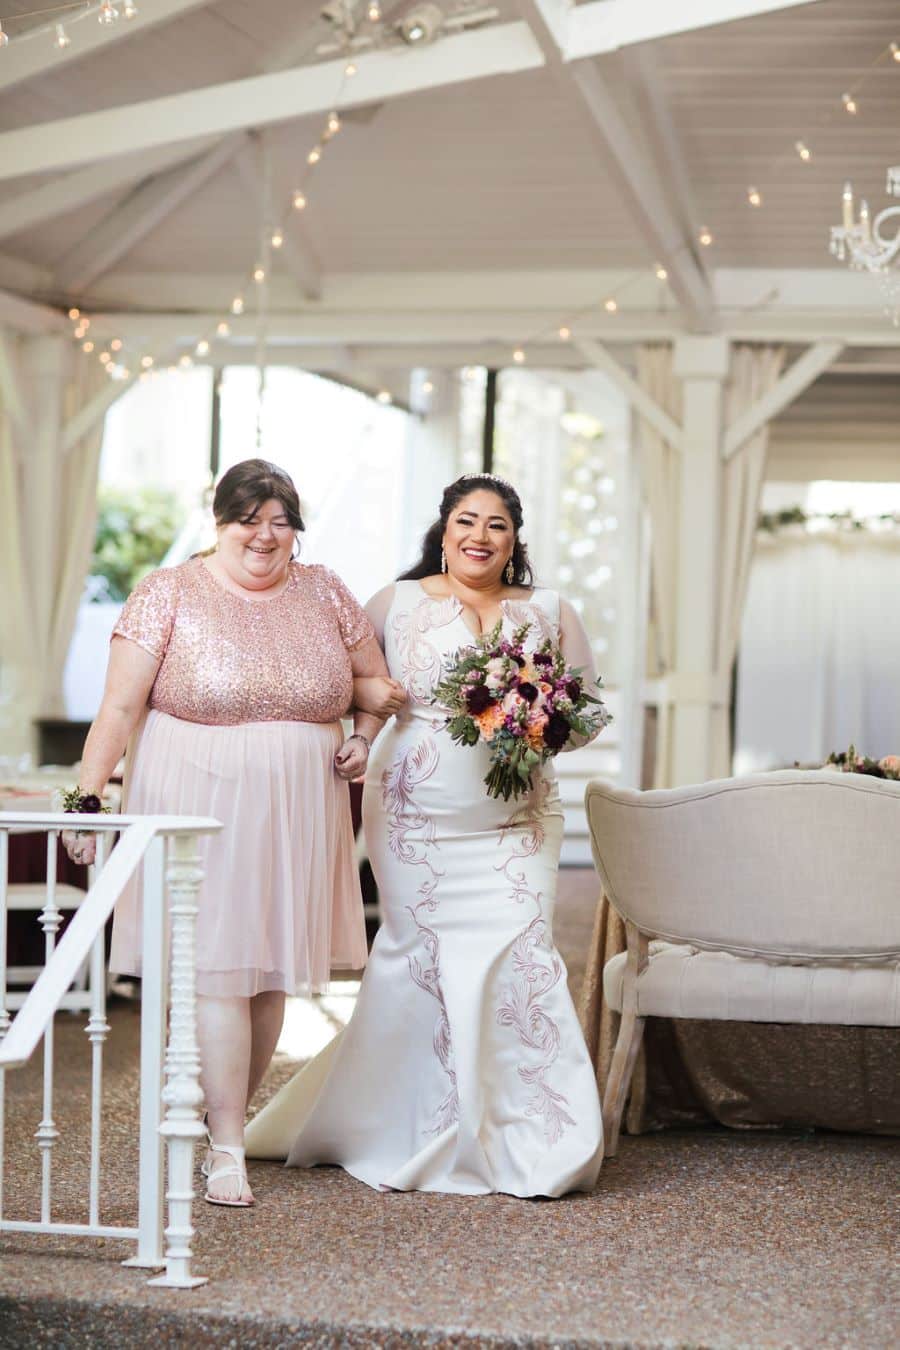 Bride walking down the aisle with her mom / romantic lgbtq / fall / September / blush / burgundy